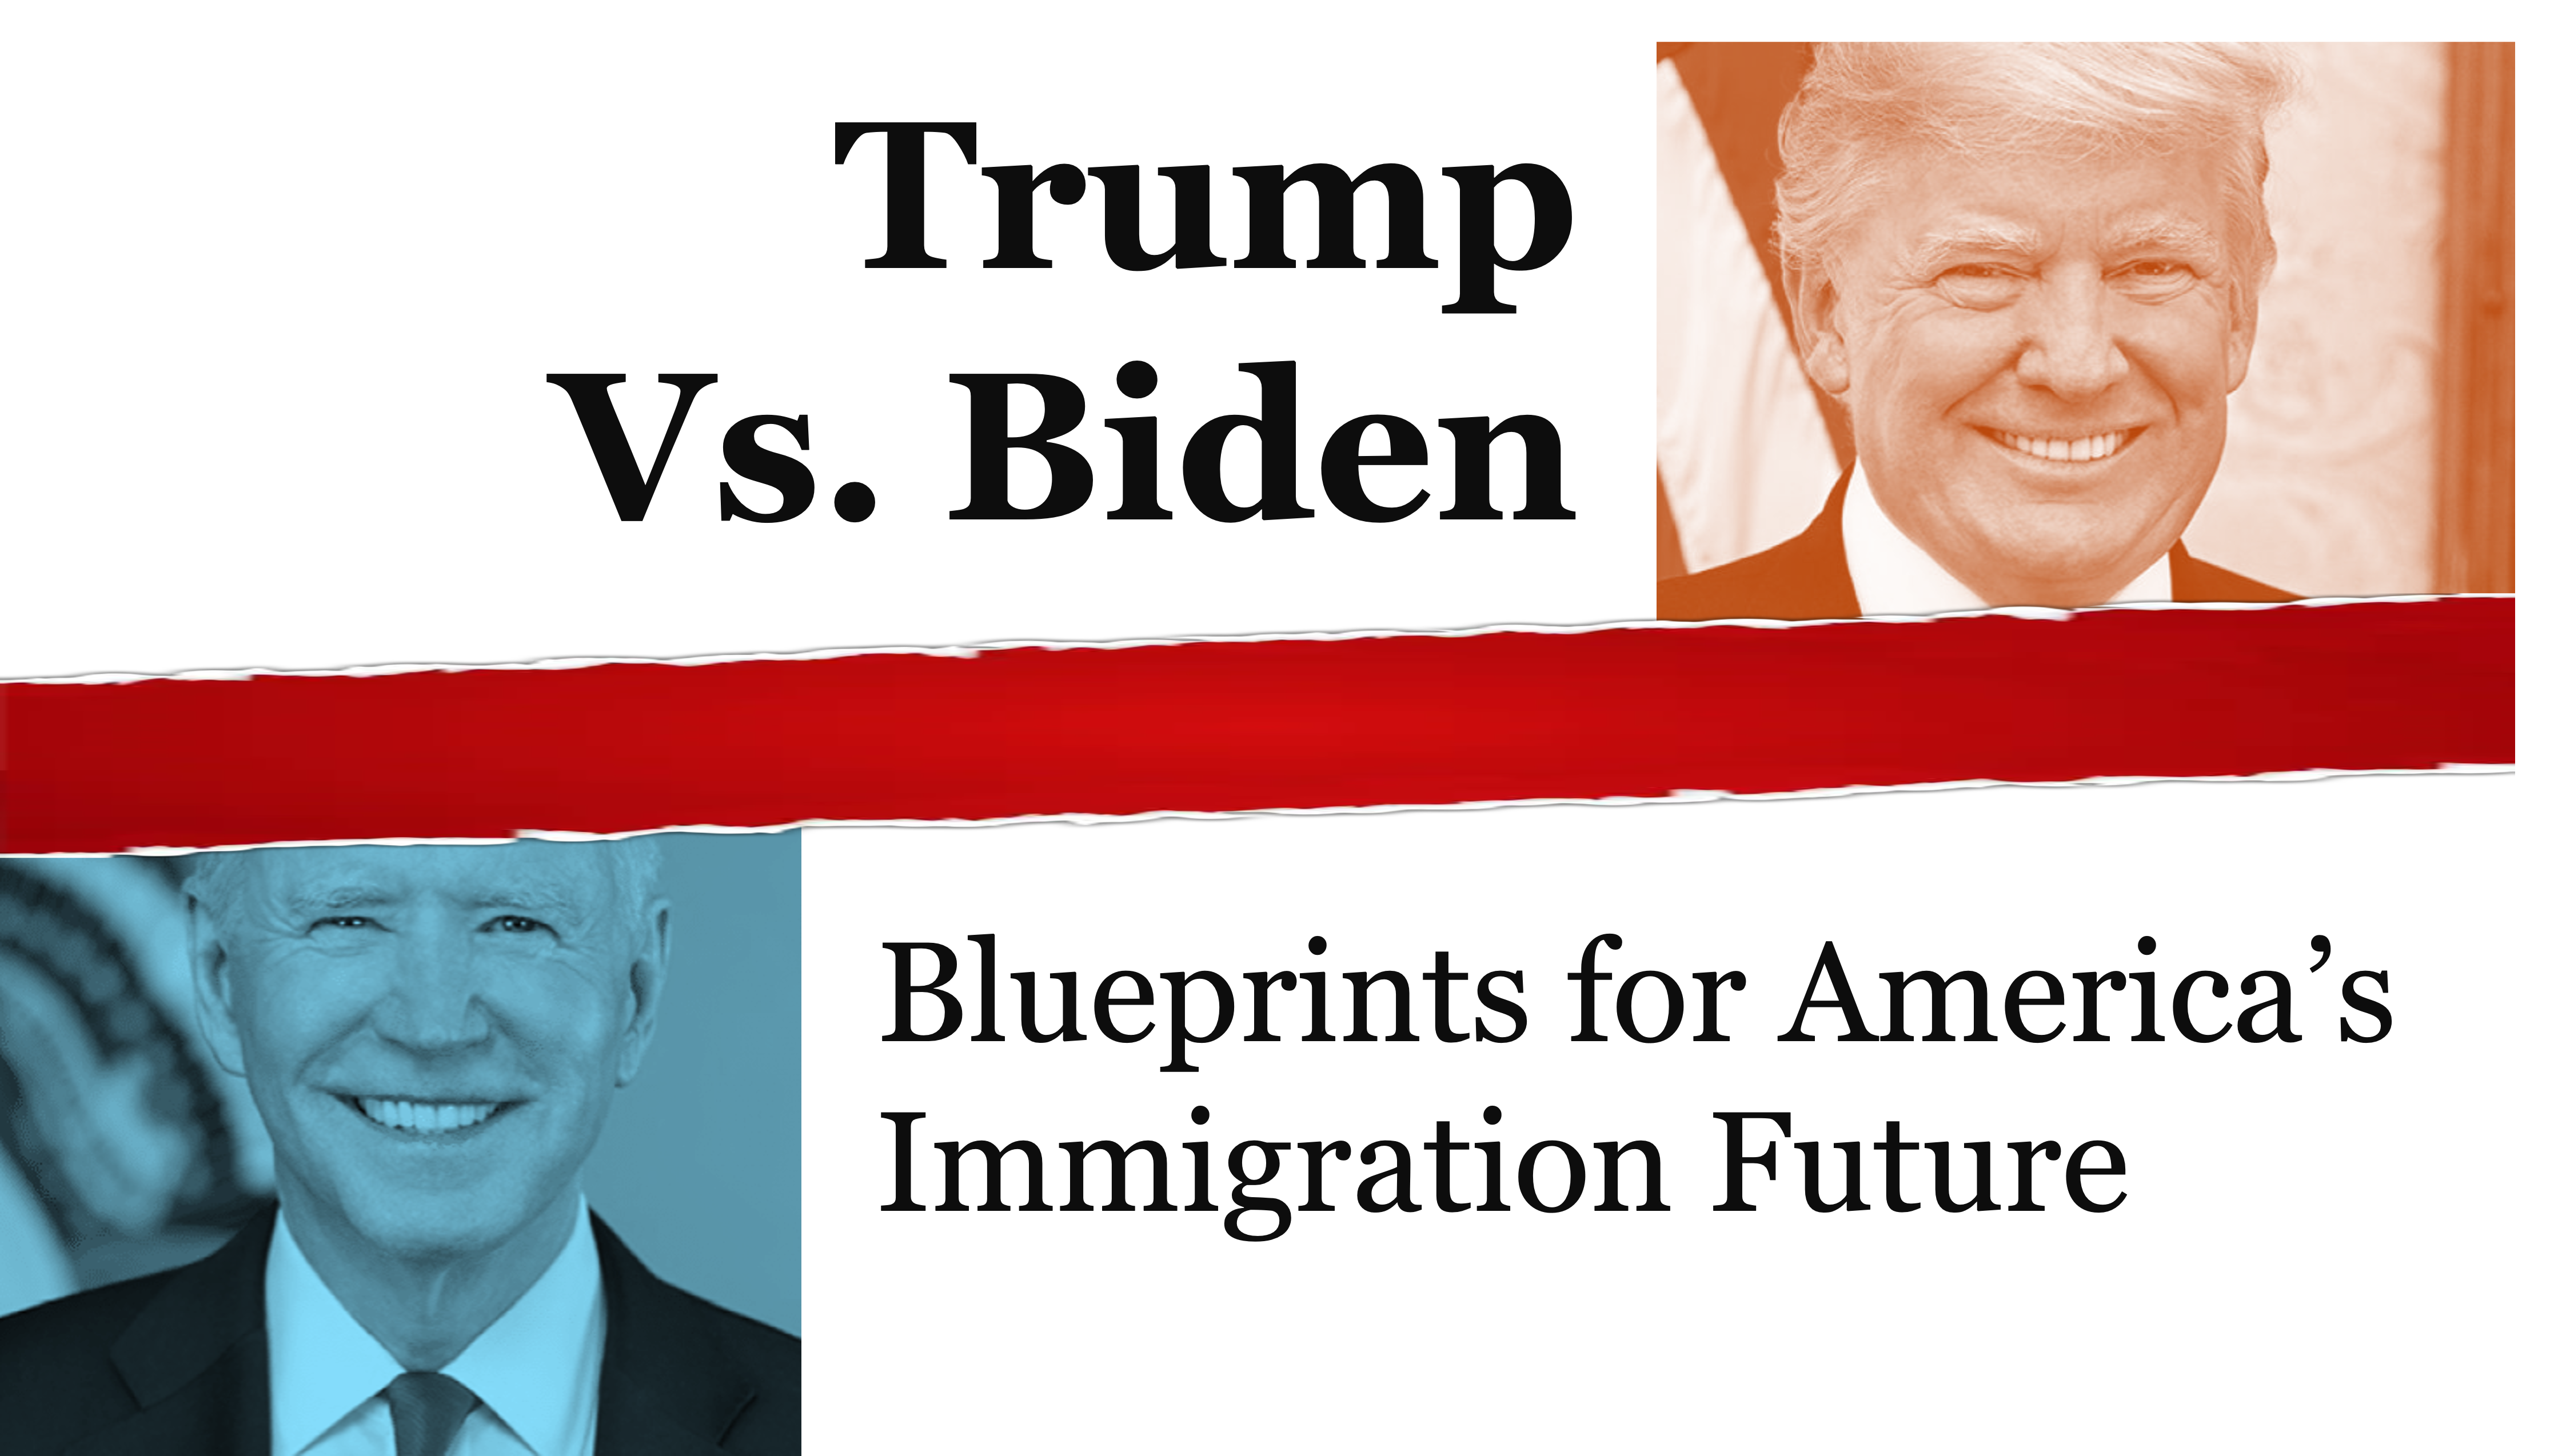 What is the difference between Trump and Biden's plans for US Immigration Policy